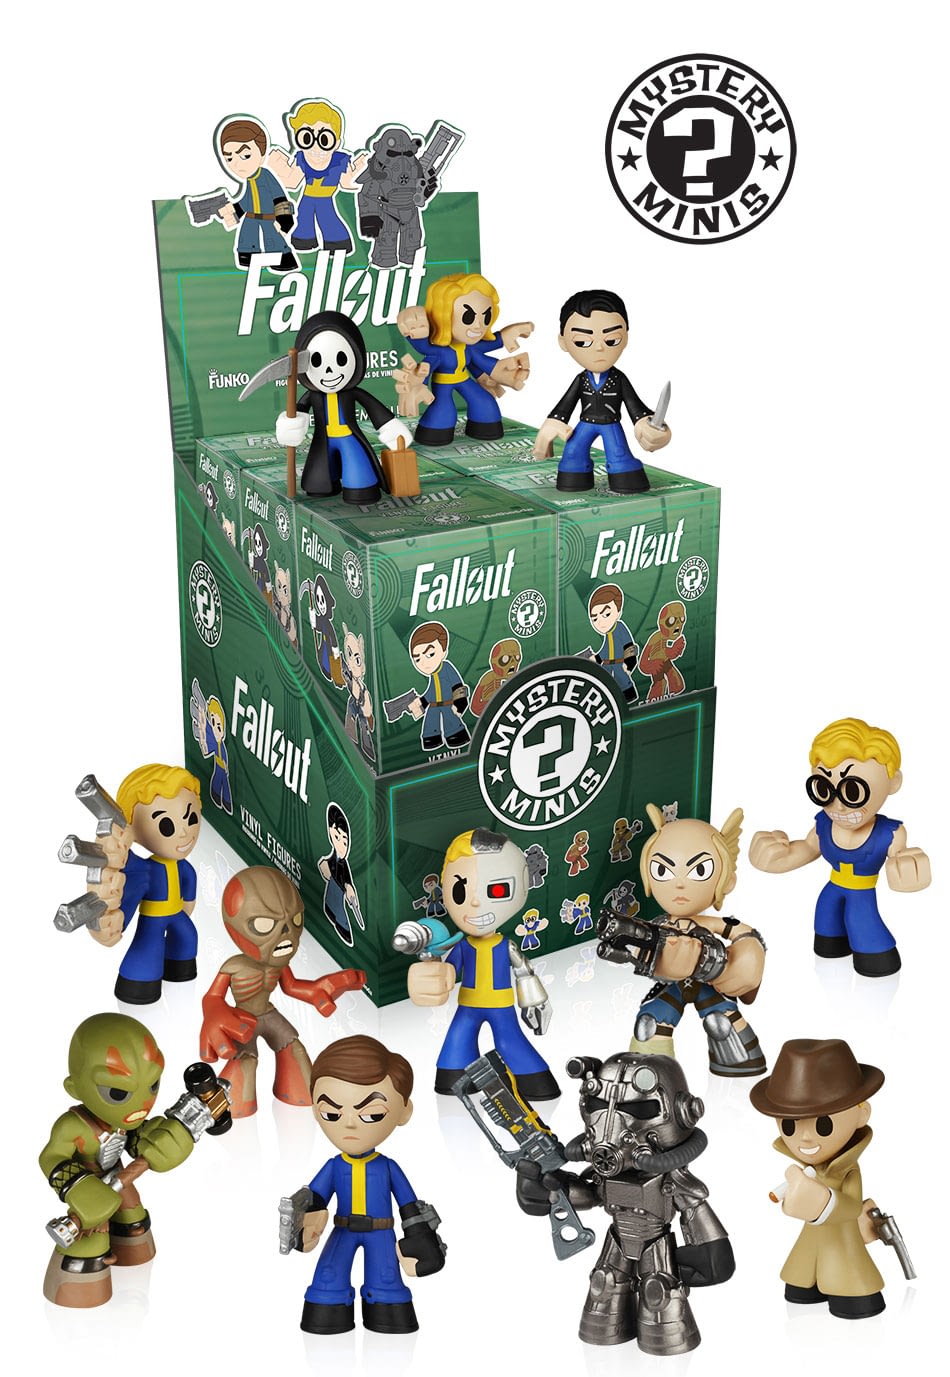 Fallout Mystery Minis from Funko